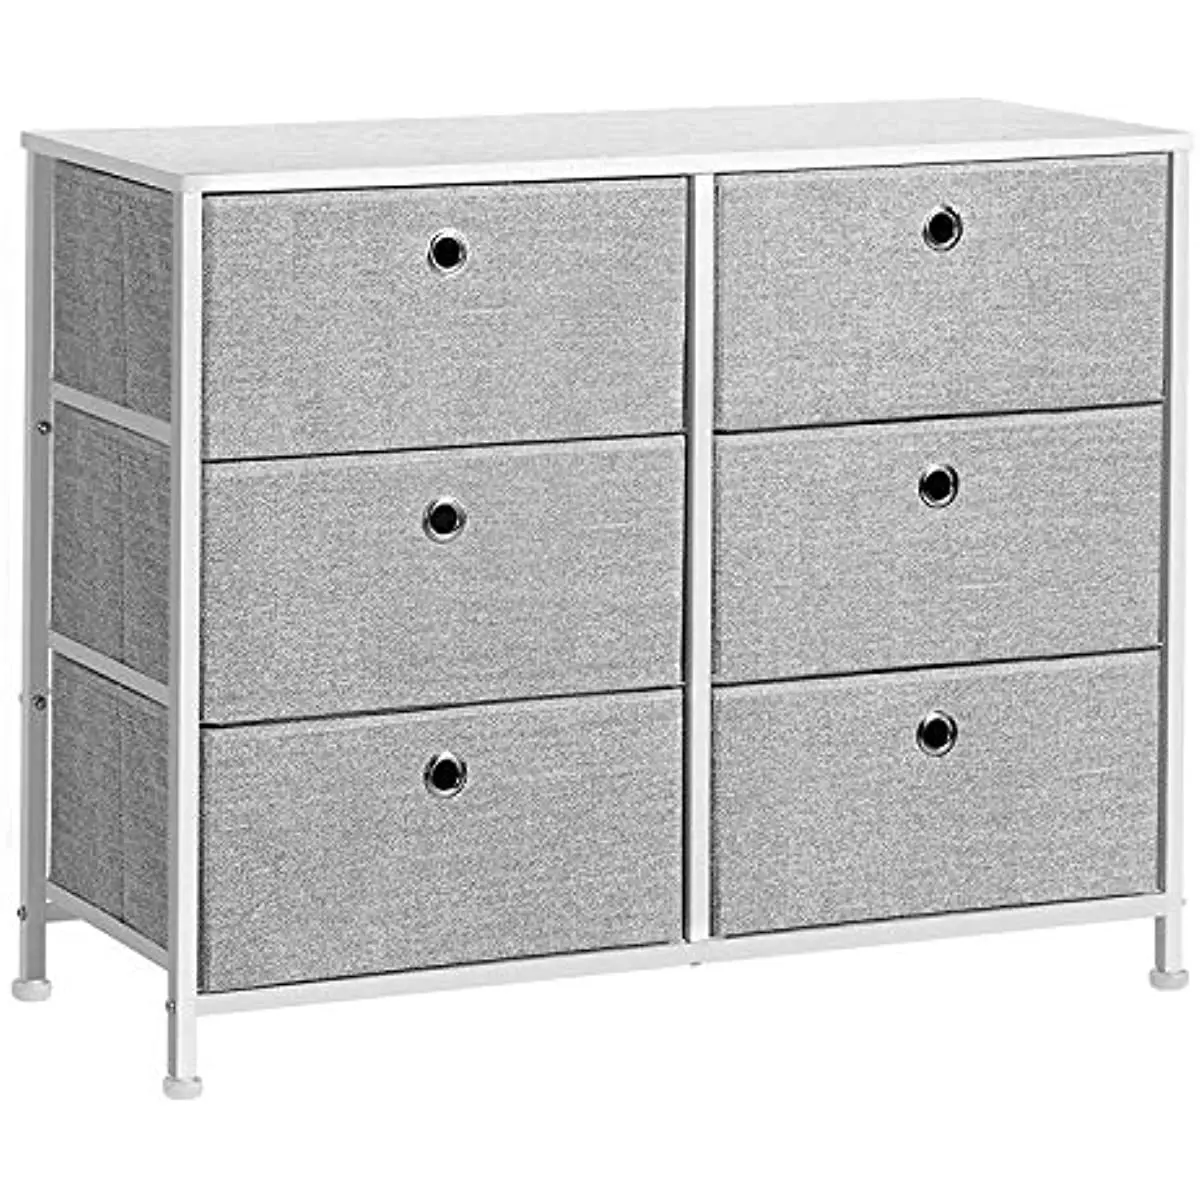 SONGMICS 3-Tier, Storage Dresser with 6 Easy Pull Fabric Drawers and Wooden Tabletop for Closets, Nursery, Dorm Room